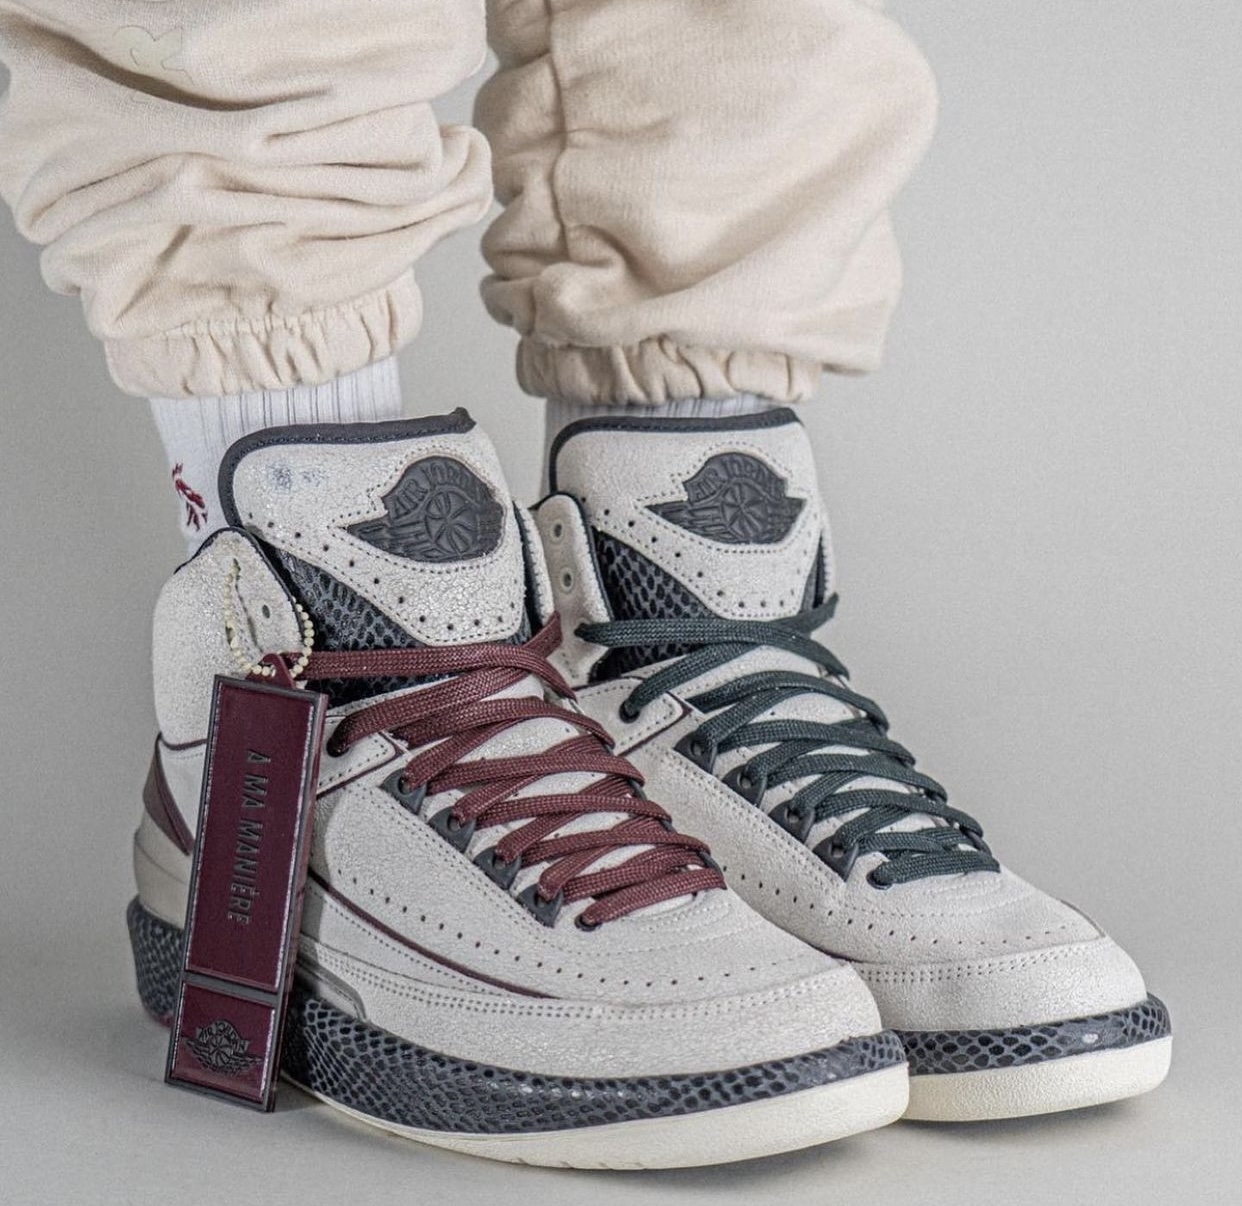 A Closer Look at The The A Ma Maniére Air Jordan 2 — Kick Game